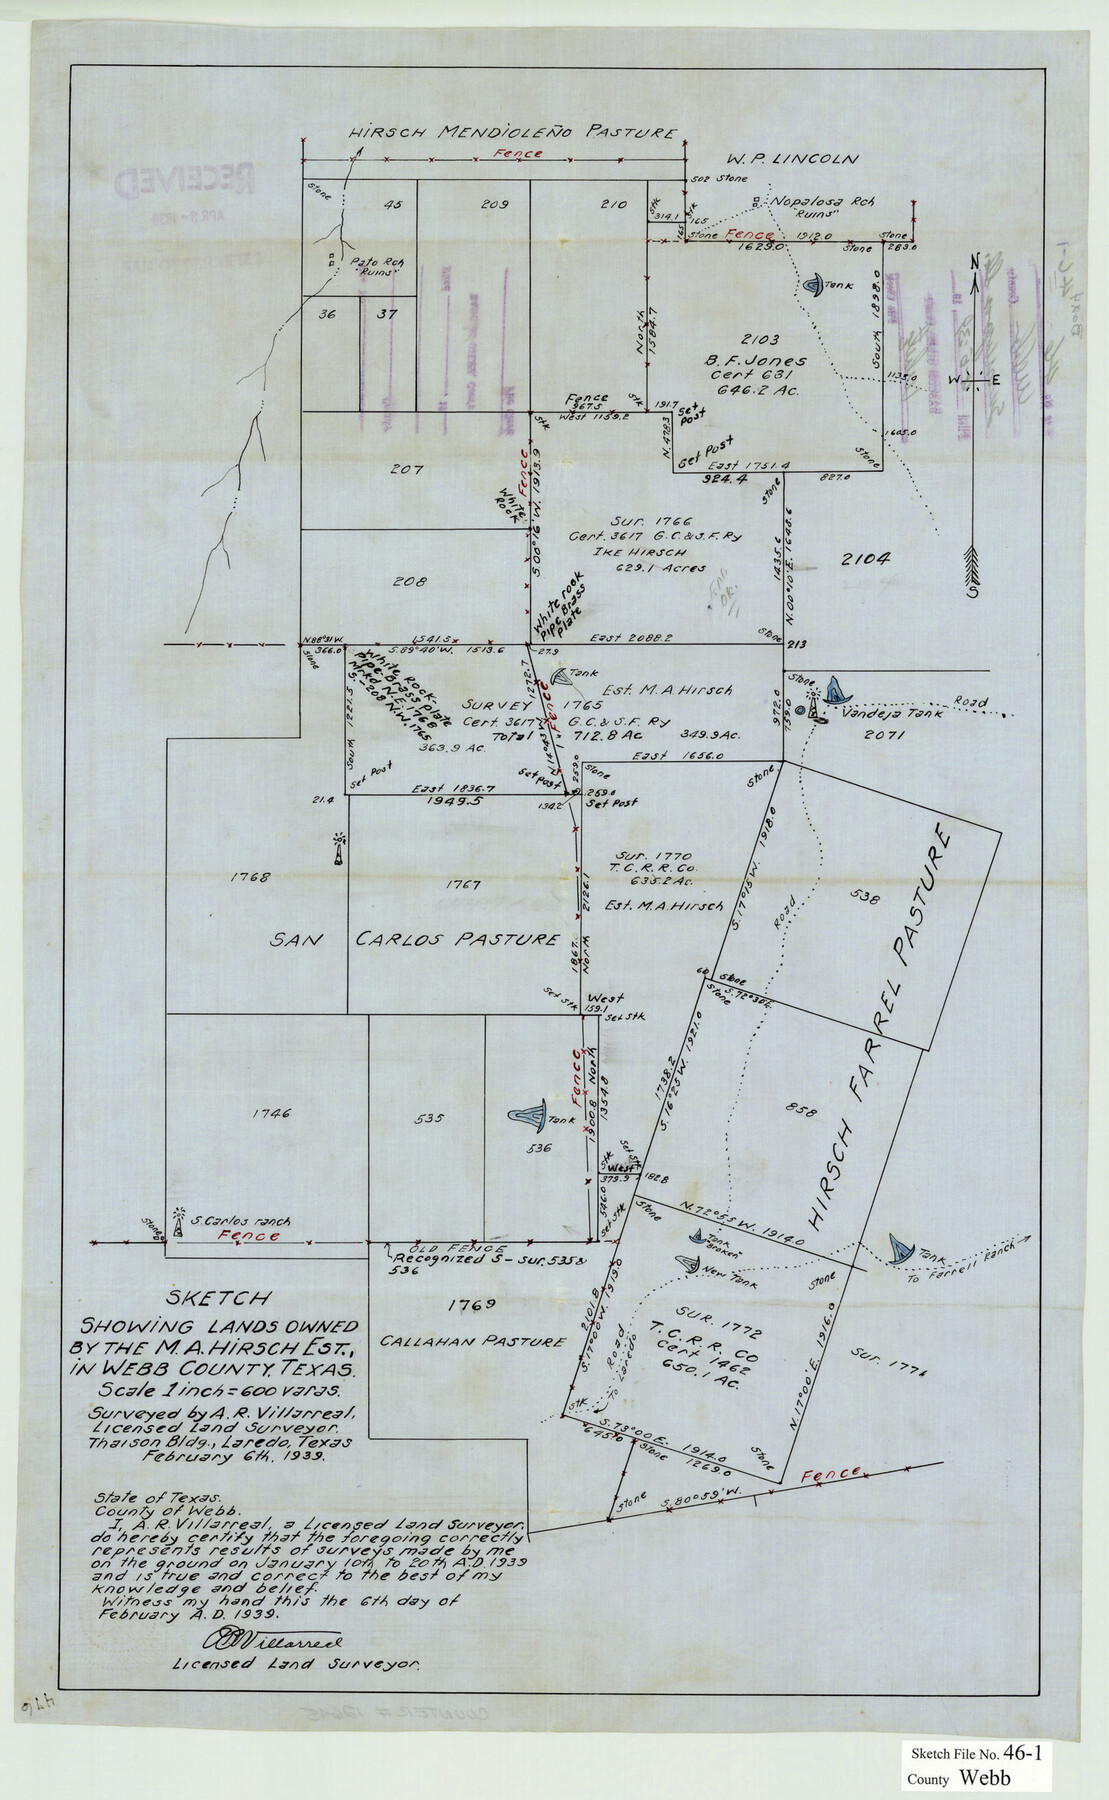 12645, Webb County Sketch File 46-1, General Map Collection